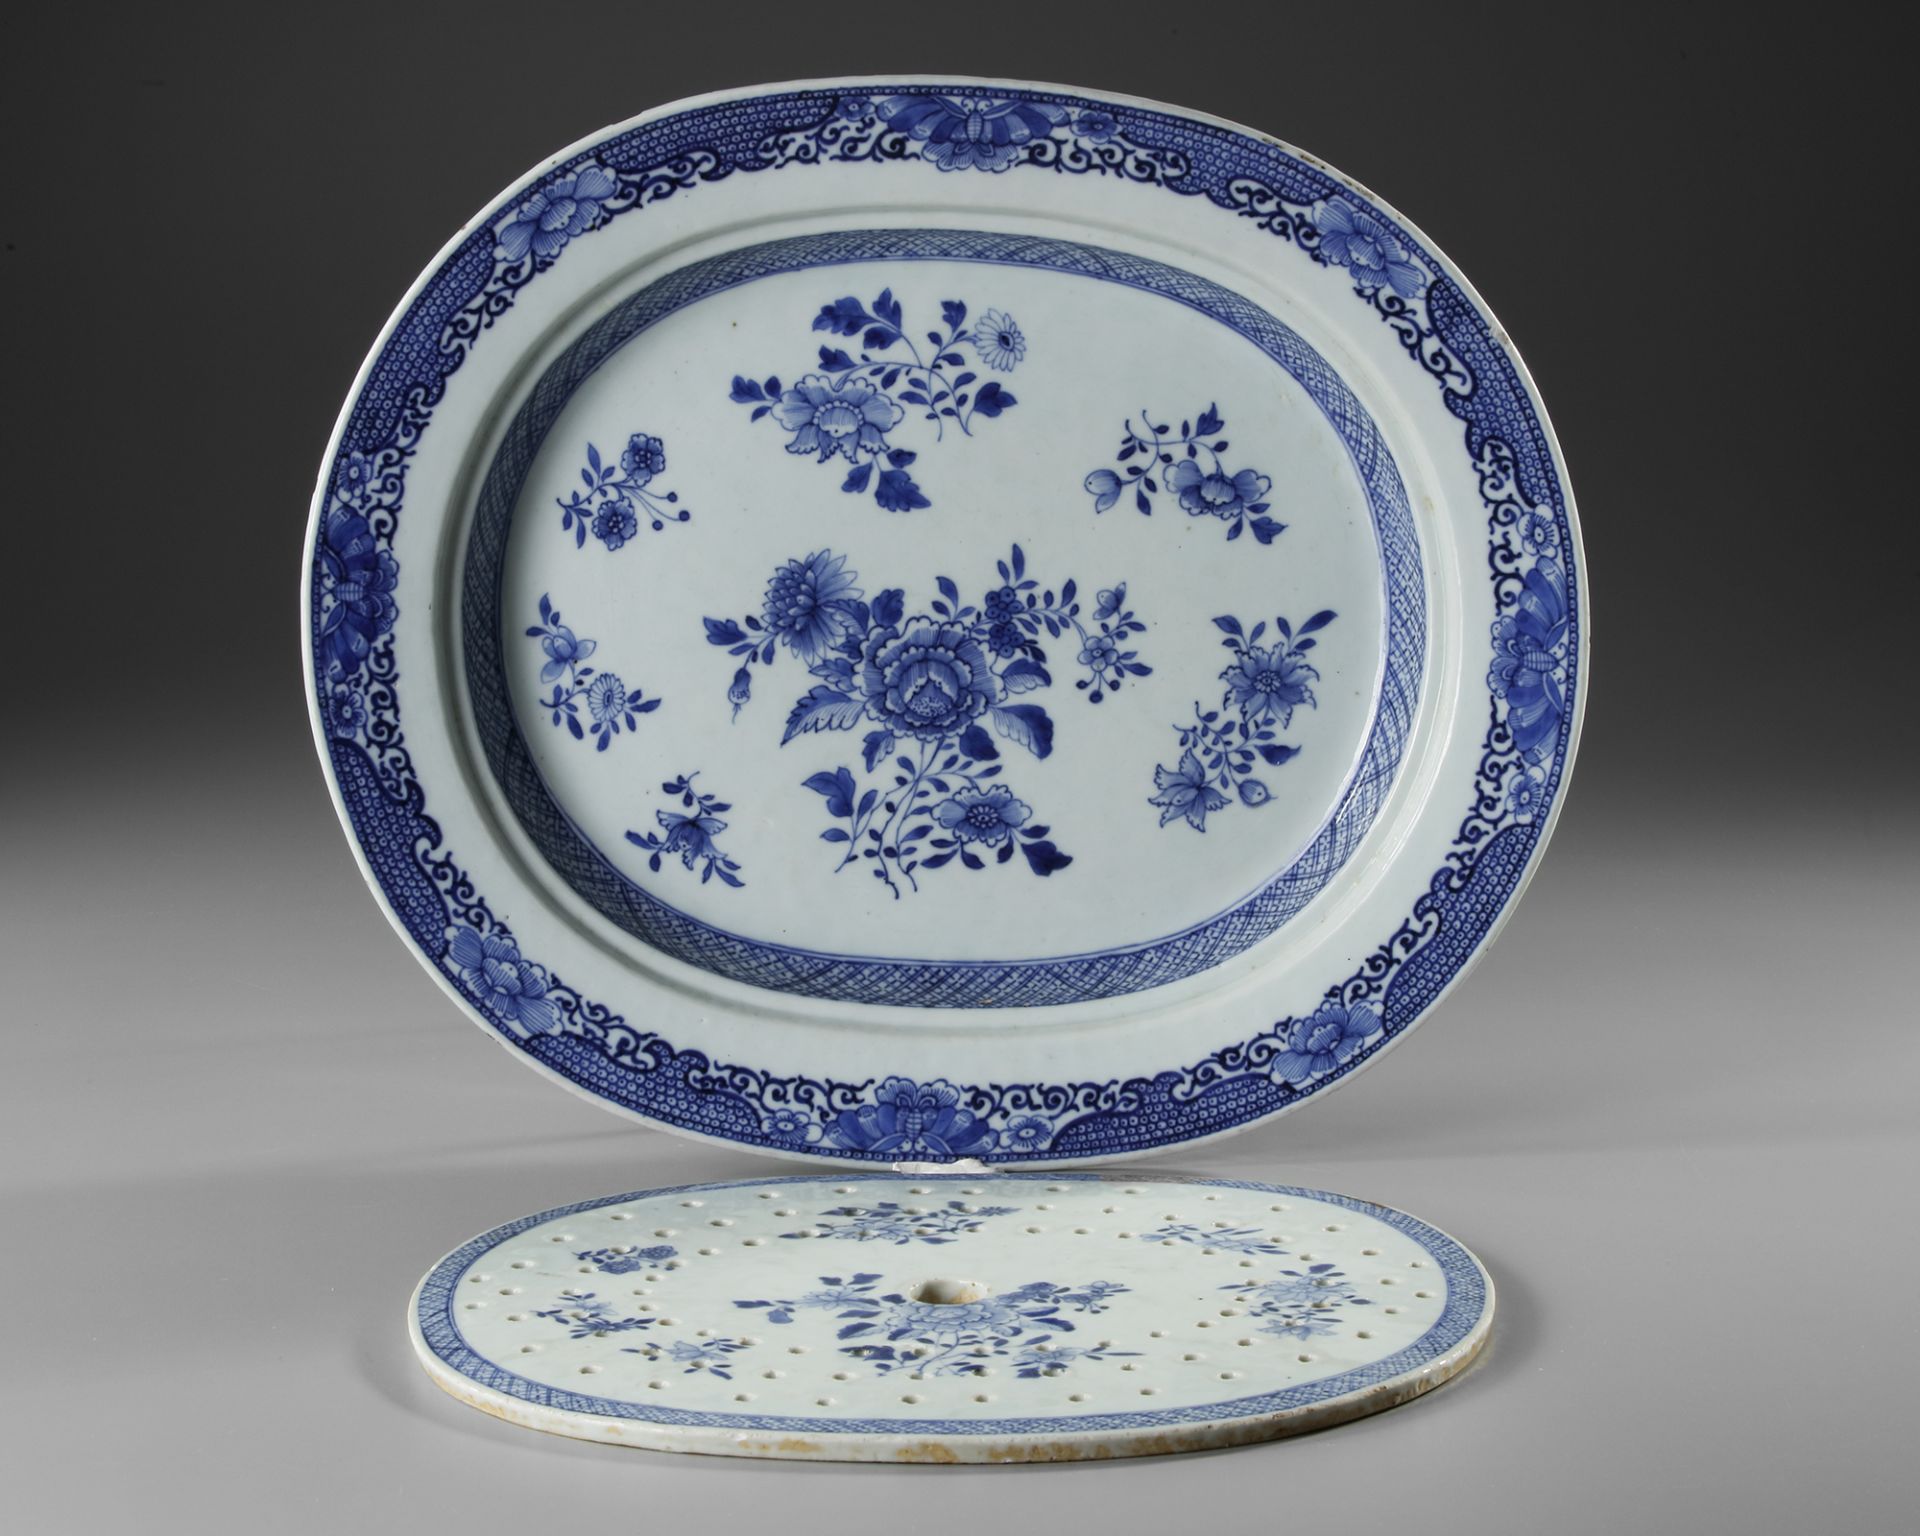 A CHINESE BLUE AND WHITE SERVING PLATTER WITH A STRAINER, 18TH CENTURY - Image 2 of 3